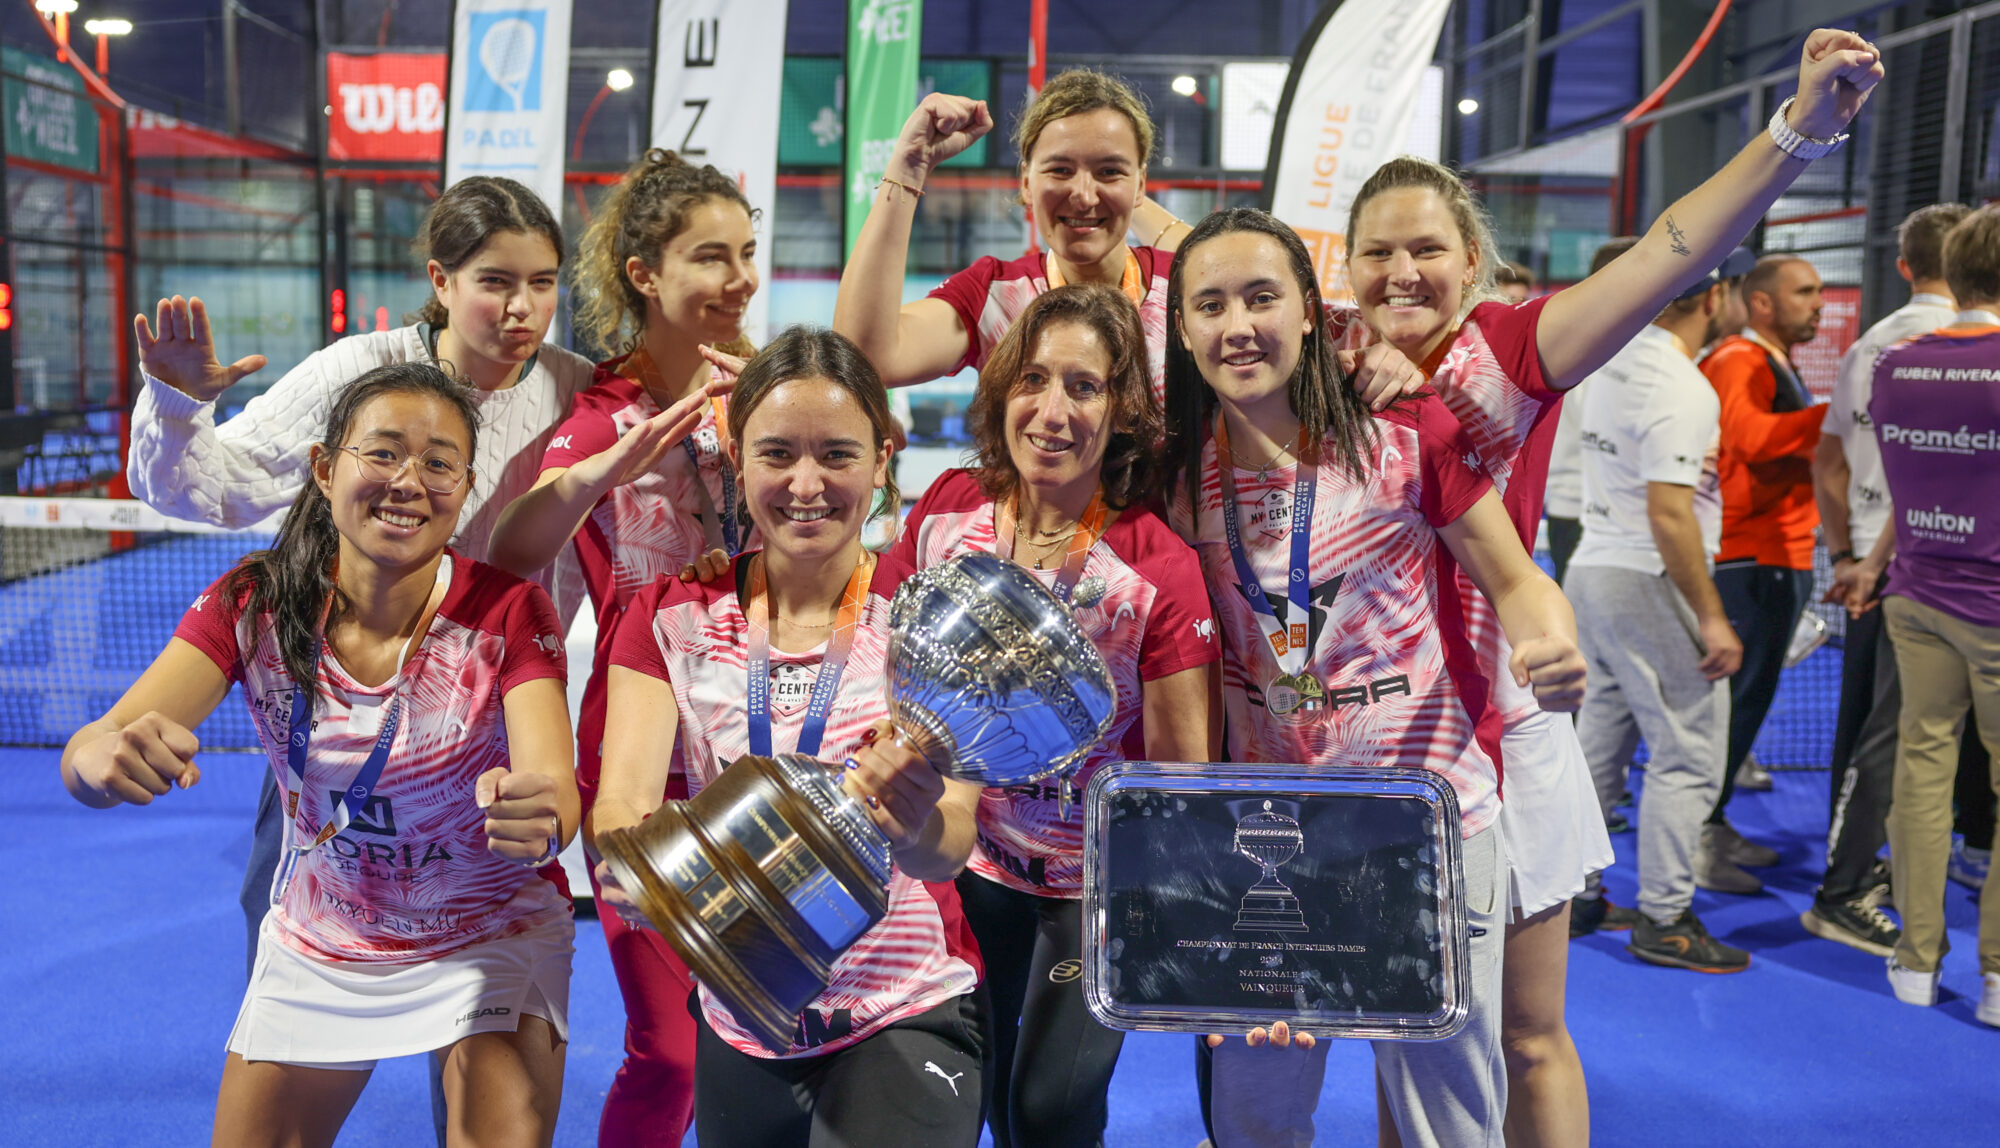 The Palavas players are champions of France!